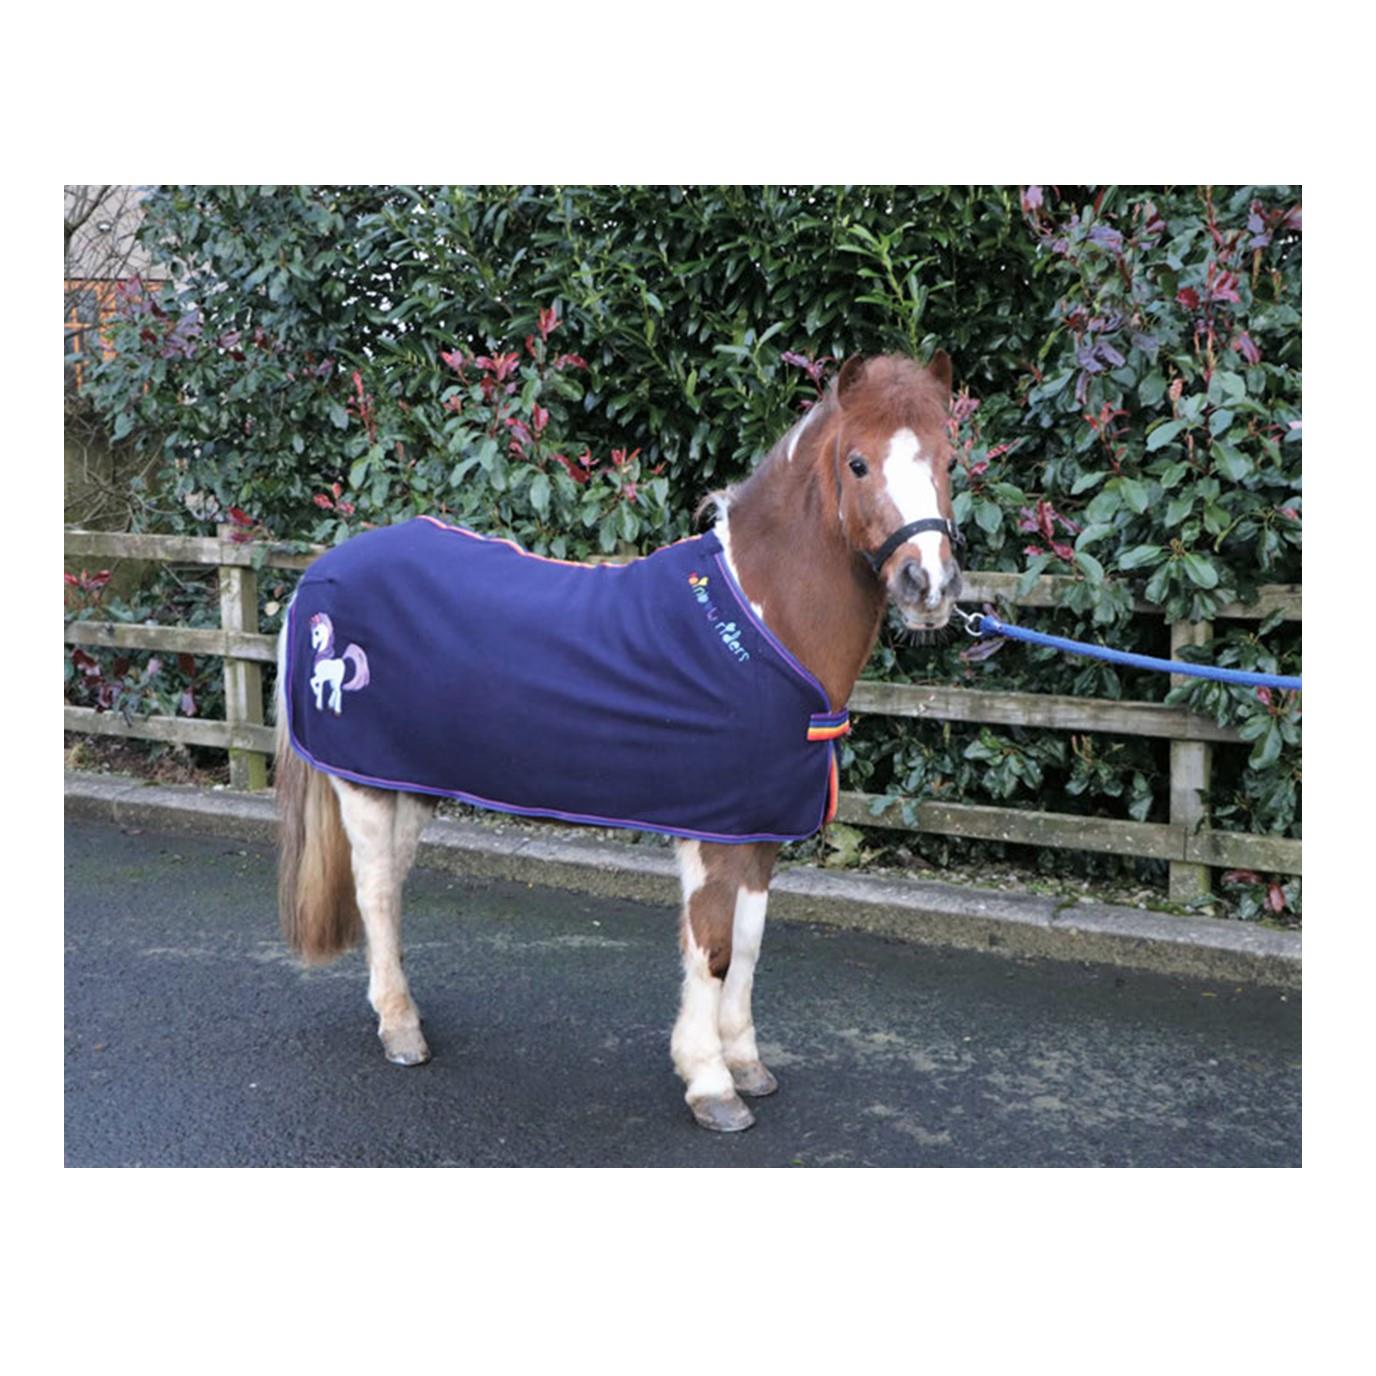 Cameo Equine Rainbow Riders Fleece Rug - Adjustable Straps & Embroidered Design - Just Horse Riders